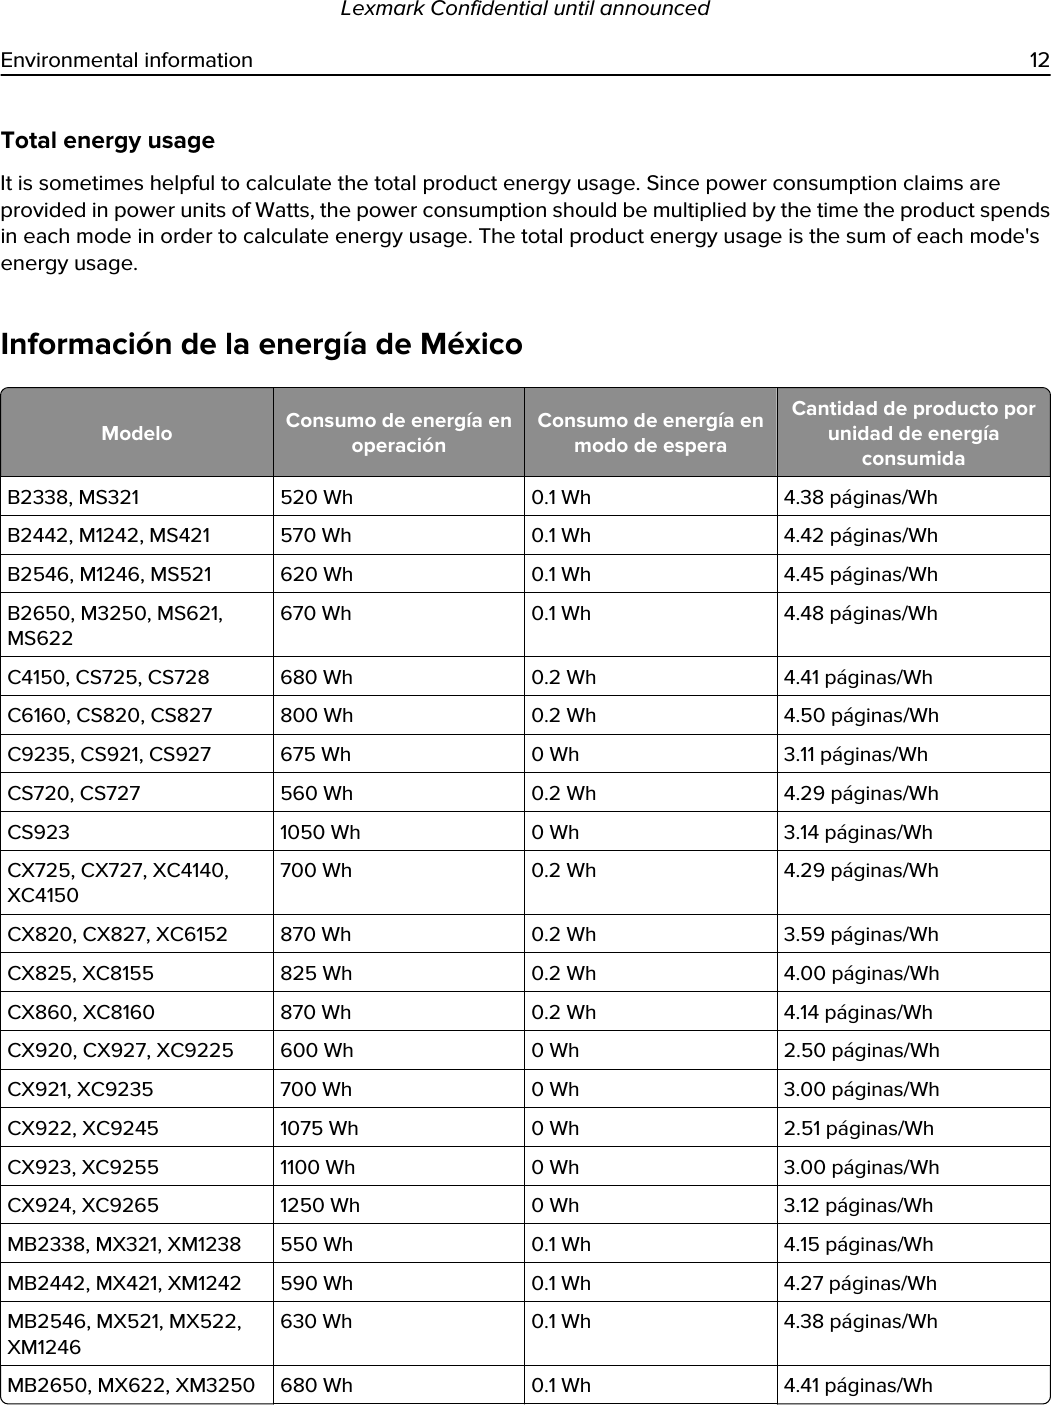 Total energy usageIt is sometimes helpful to calculate the total product energy usage. Since power consumption claims are provided in power units of Watts, the power consumption should be multiplied by the time the product spends in each mode in order to calculate energy usage. The total product energy usage is the sum of each mode&apos;s energy usage.Información de la energía de MéxicoModelo Consumo de energía en operaciónConsumo de energía en modo de esperaCantidad de producto por unidad de energía consumidaB2338, MS321 520 Wh 0.1 Wh 4.38 páginas/WhB2442, M1242, MS421 570 Wh 0.1 Wh 4.42 páginas/WhB2546, M1246, MS521 620 Wh 0.1 Wh 4.45 páginas/WhB2650, M3250, MS621, MS622670 Wh 0.1 Wh 4.48 páginas/WhC4150, CS725, CS728 680 Wh 0.2 Wh 4.41 páginas/WhC6160, CS820, CS827 800 Wh 0.2 Wh 4.50 páginas/WhC9235, CS921, CS927 675 Wh 0 Wh 3.11 páginas/WhCS720, CS727 560 Wh 0.2 Wh 4.29 páginas/WhCS923 1050 Wh 0 Wh 3.14 páginas/WhCX725, CX727, XC4140, XC4150700 Wh 0.2 Wh 4.29 páginas/WhCX820, CX827, XC6152 870 Wh 0.2 Wh 3.59 páginas/WhCX825, XC8155 825 Wh 0.2 Wh 4.00 páginas/WhCX860, XC8160 870 Wh 0.2 Wh 4.14 páginas/WhCX920, CX927, XC9225 600 Wh 0 Wh 2.50 páginas/WhCX921, XC9235 700 Wh 0 Wh 3.00 páginas/WhCX922, XC9245 1075 Wh 0 Wh 2.51 páginas/WhCX923, XC9255 1100 Wh 0 Wh 3.00 páginas/WhCX924, XC9265 1250 Wh 0 Wh 3.12 páginas/WhMB2338, MX321, XM1238 550 Wh 0.1 Wh 4.15 páginas/WhMB2442, MX421, XM1242 590 Wh 0.1 Wh 4.27 páginas/WhMB2546, MX521, MX522, XM1246630 Wh 0.1 Wh 4.38 páginas/WhMB2650, MX622, XM3250 680 Wh 0.1 Wh 4.41 páginas/WhLexmark Confidential until announcedEnvironmental information 12